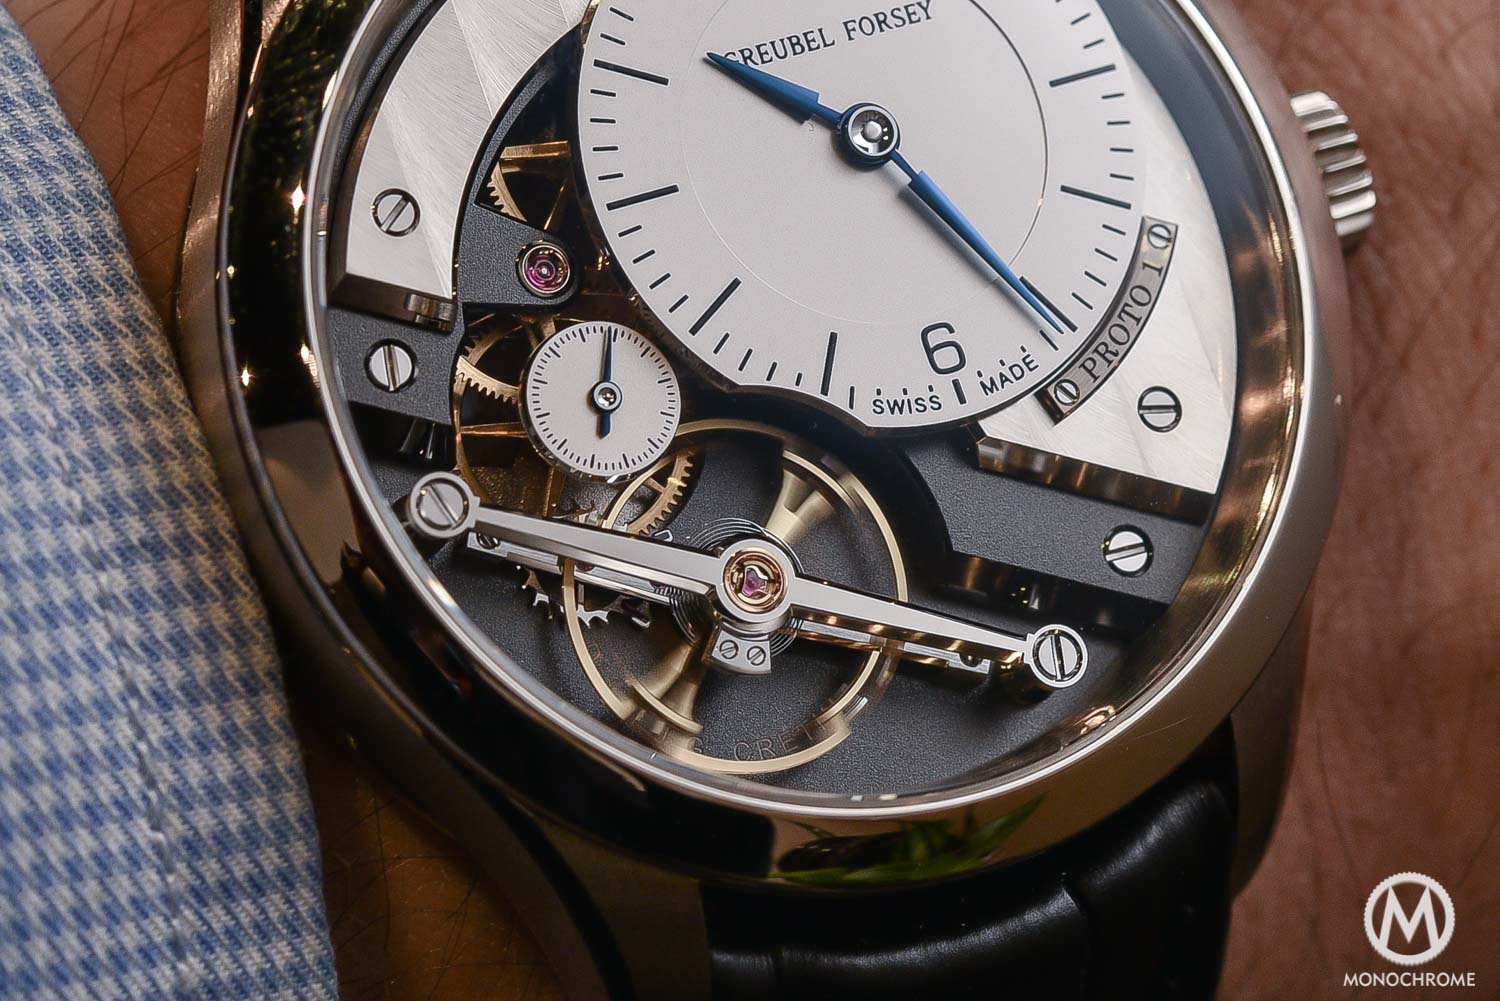 Greubel Forsey Signature 1 - Stainless steel entry level - SIHH 2016 - close up balance wheel